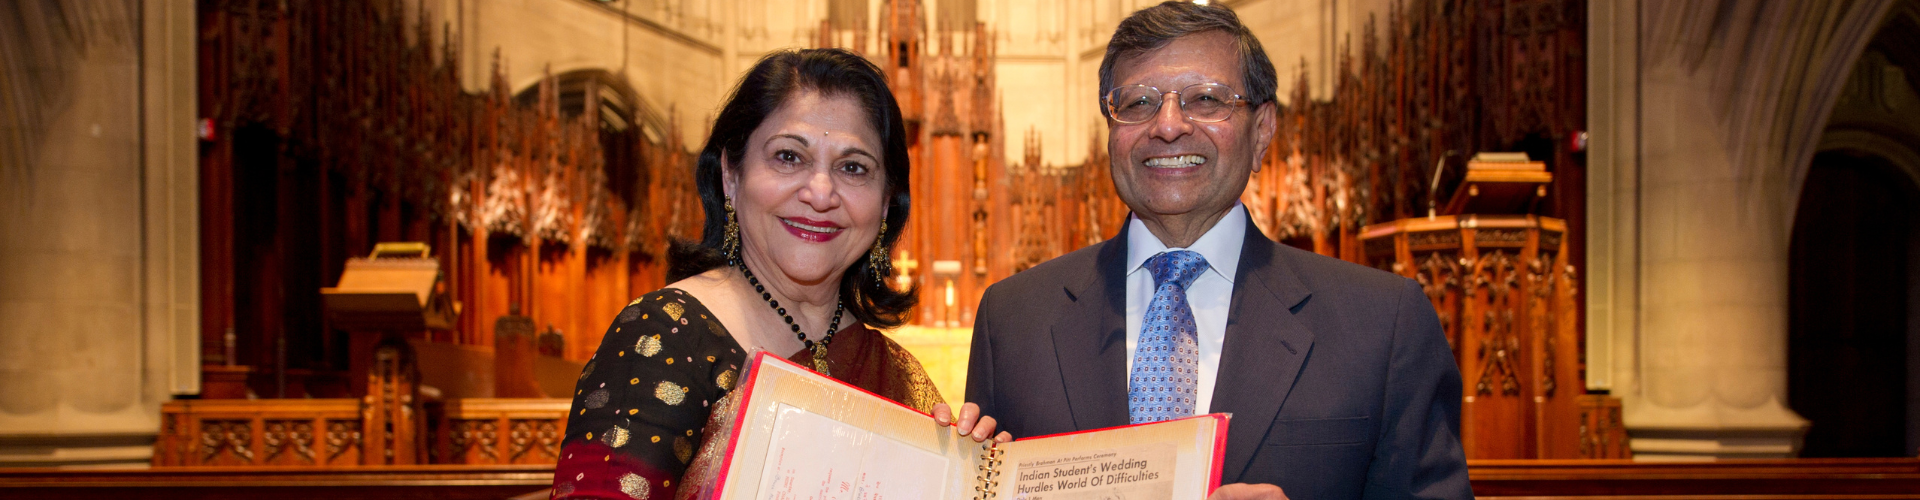 Dr. and Mrs. Sheth in Heinz Chapel